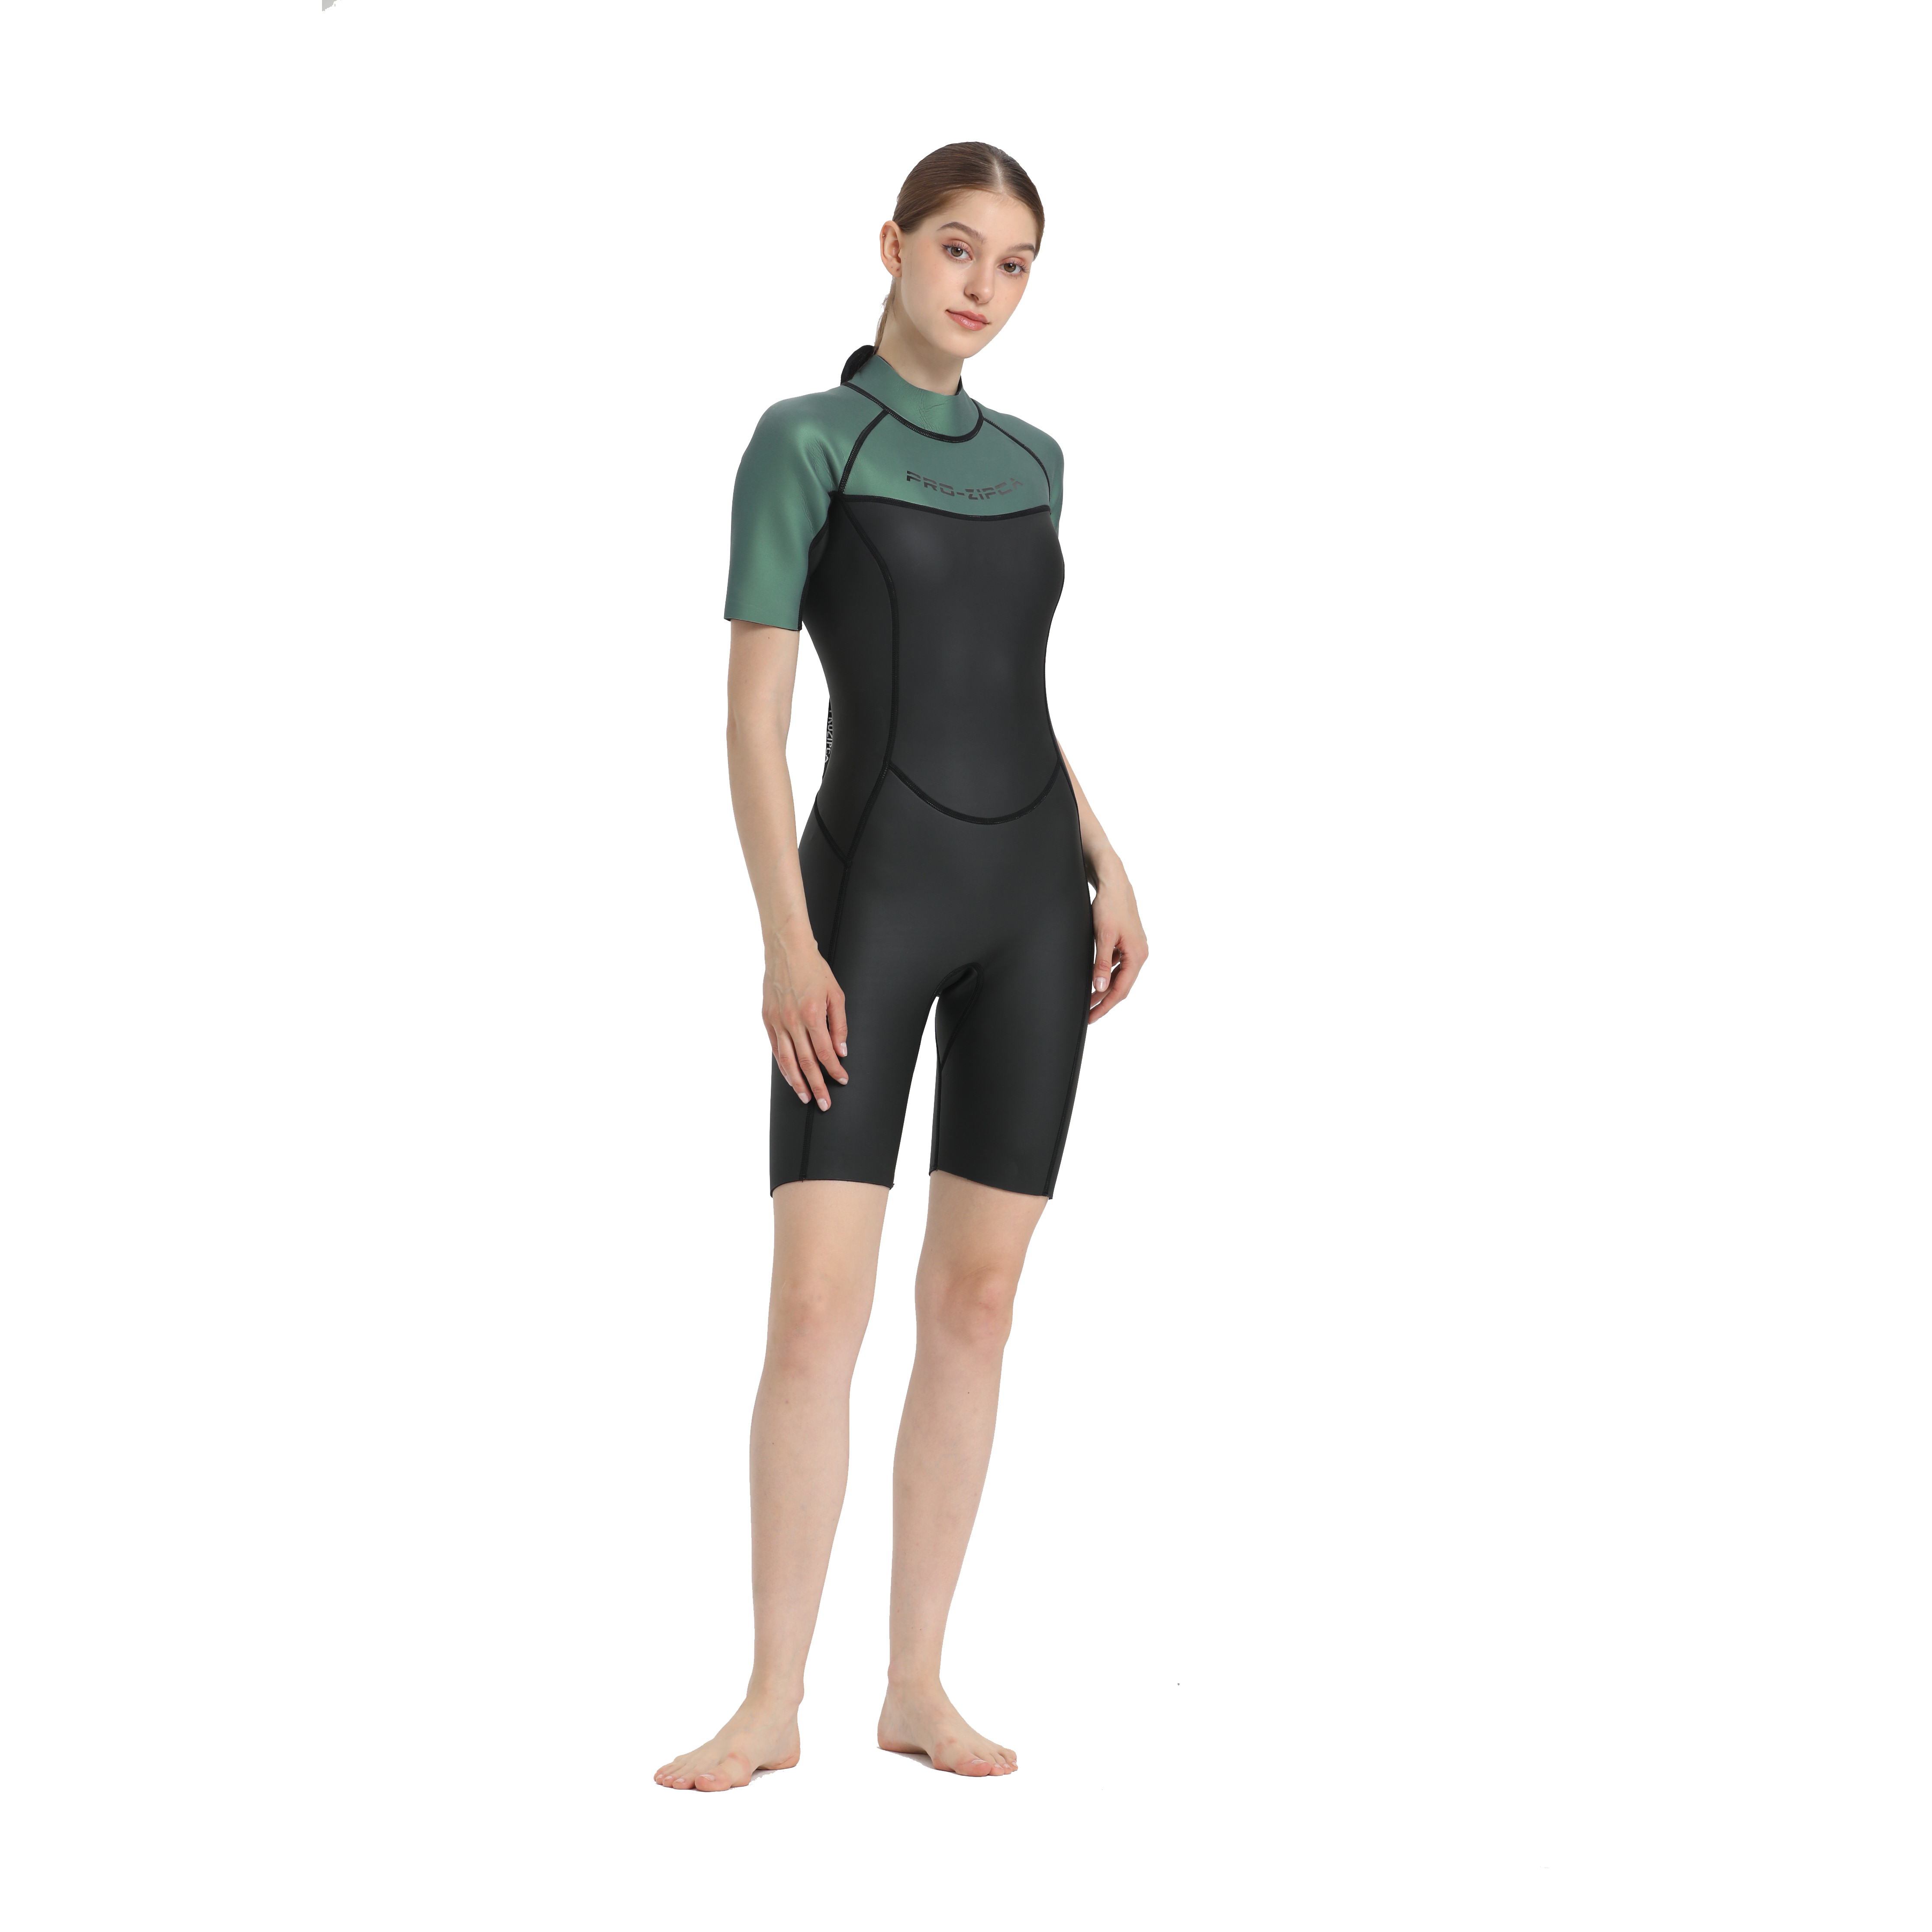 2022 New Design High Quality One Piece Back Zip Tight Breathable Shorty Women Smooth Skin Wetsuit